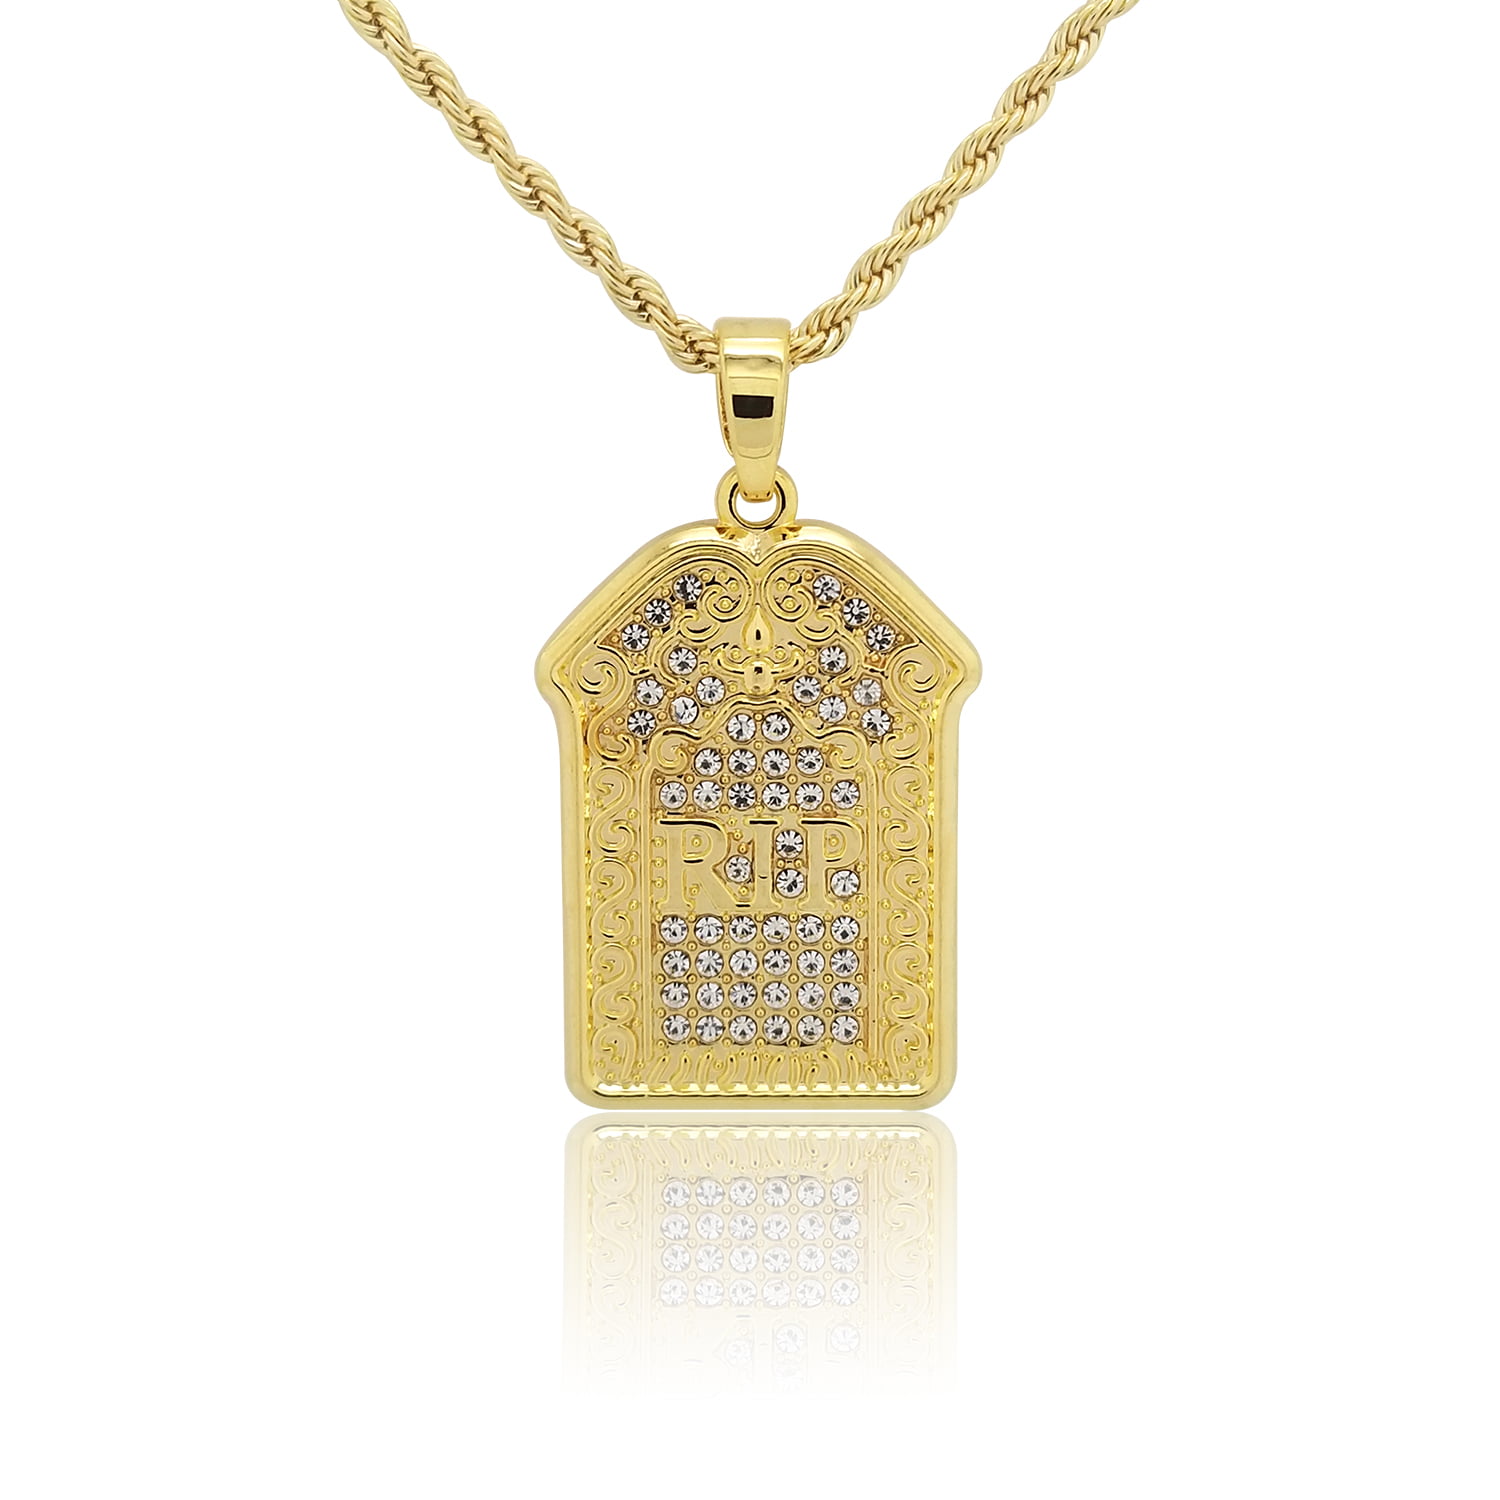 Details about   Necklace Hip Hop Chain Pendant Jewelry Rhinestones Gold Men Rhinestone Crystal S